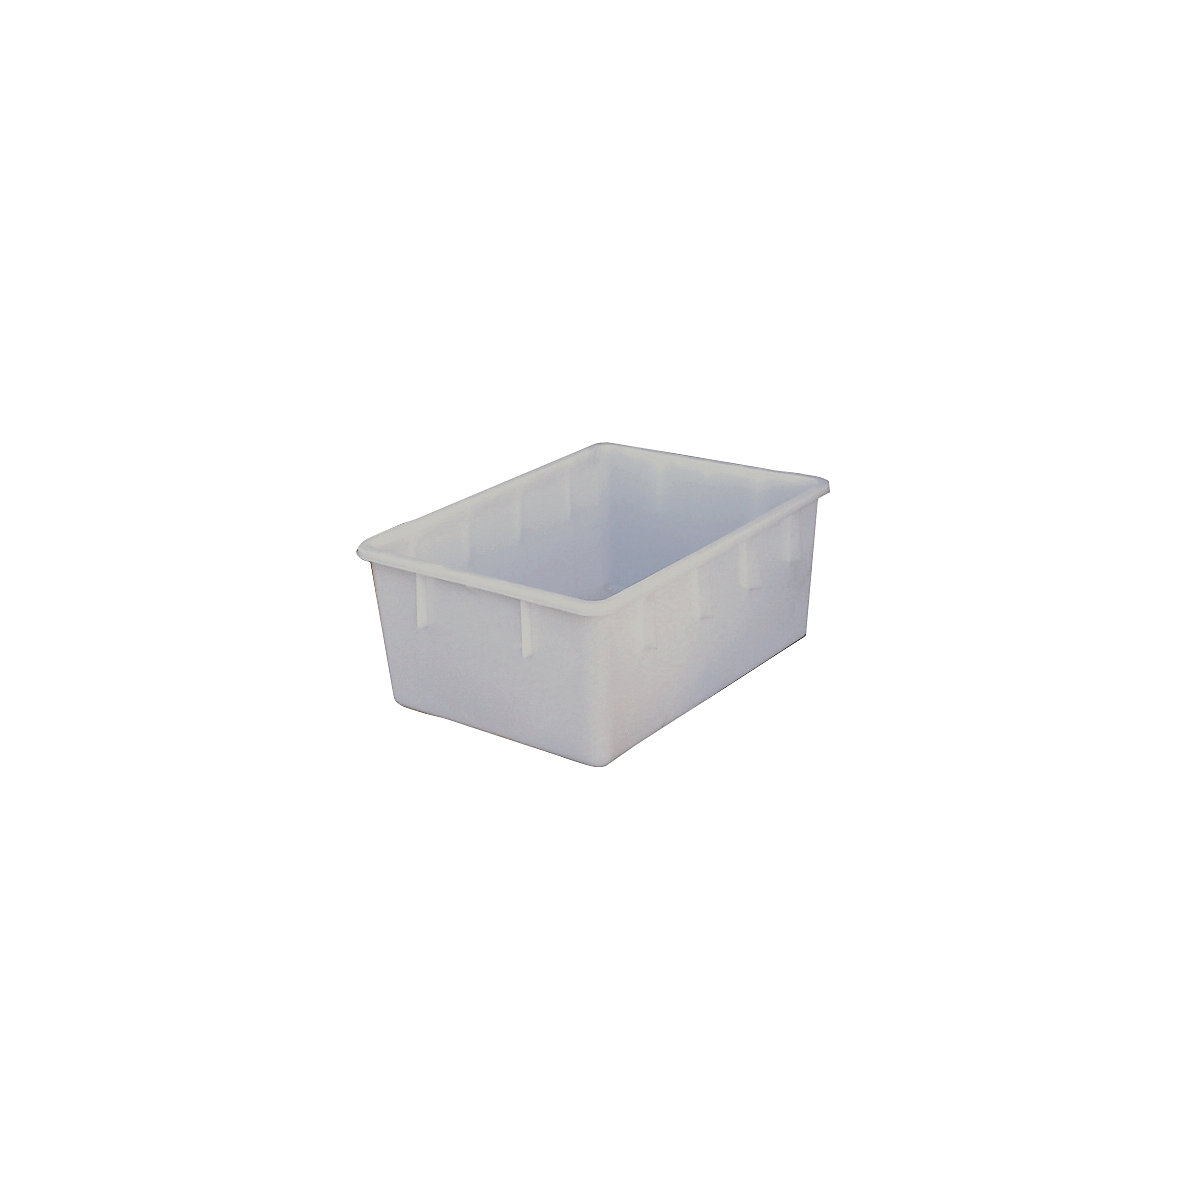 Stacking container made of polyethylene, conical design